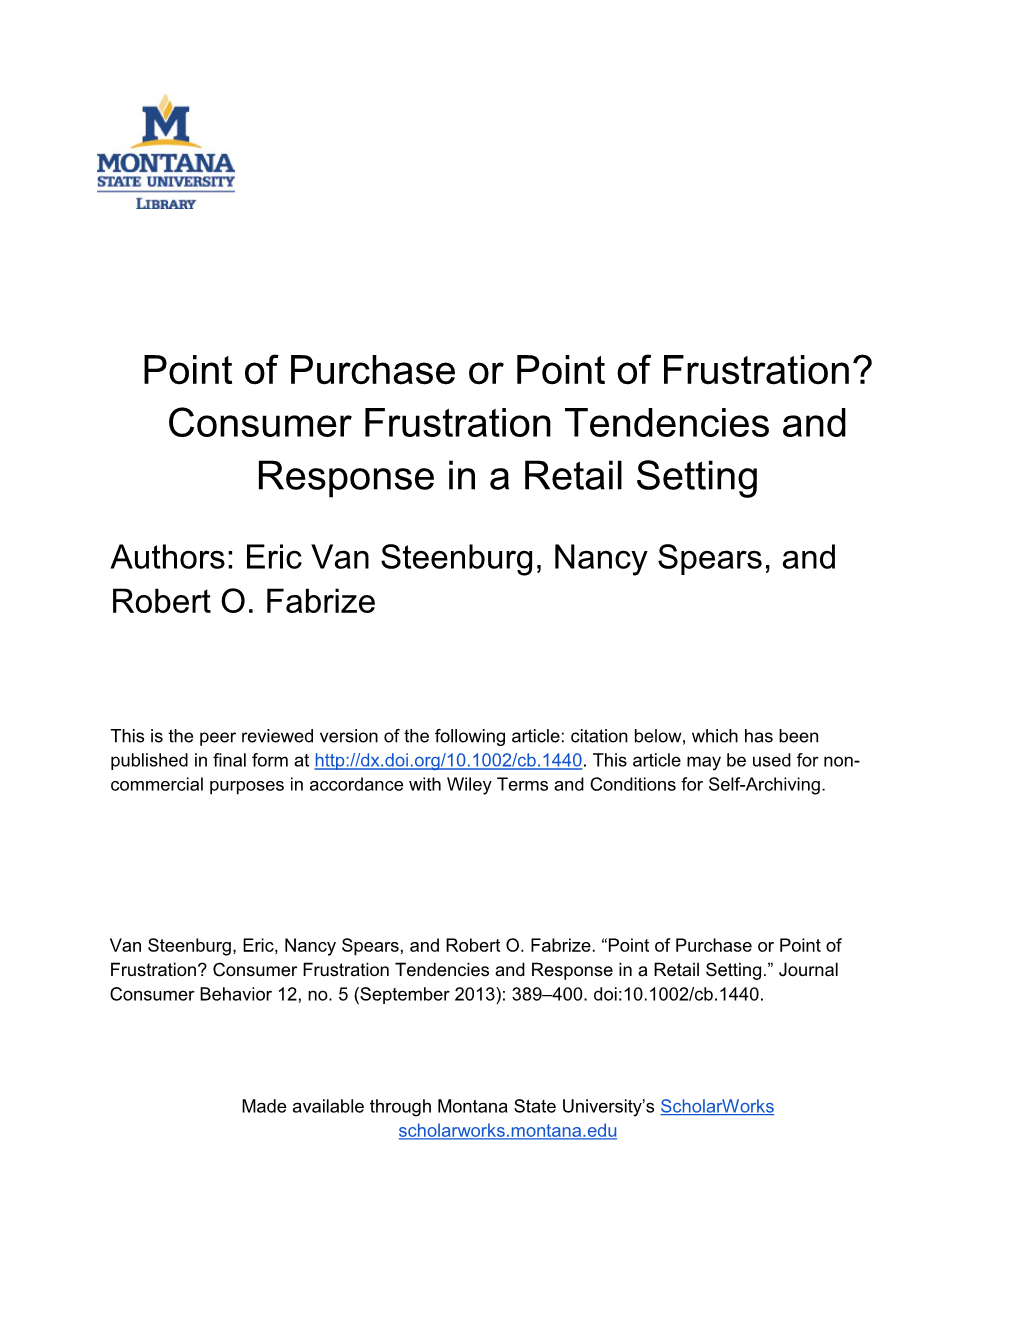 Point of Purchase Or Point of Frustration? Consumer Frustration Tendencies and Response in a Retail Setting